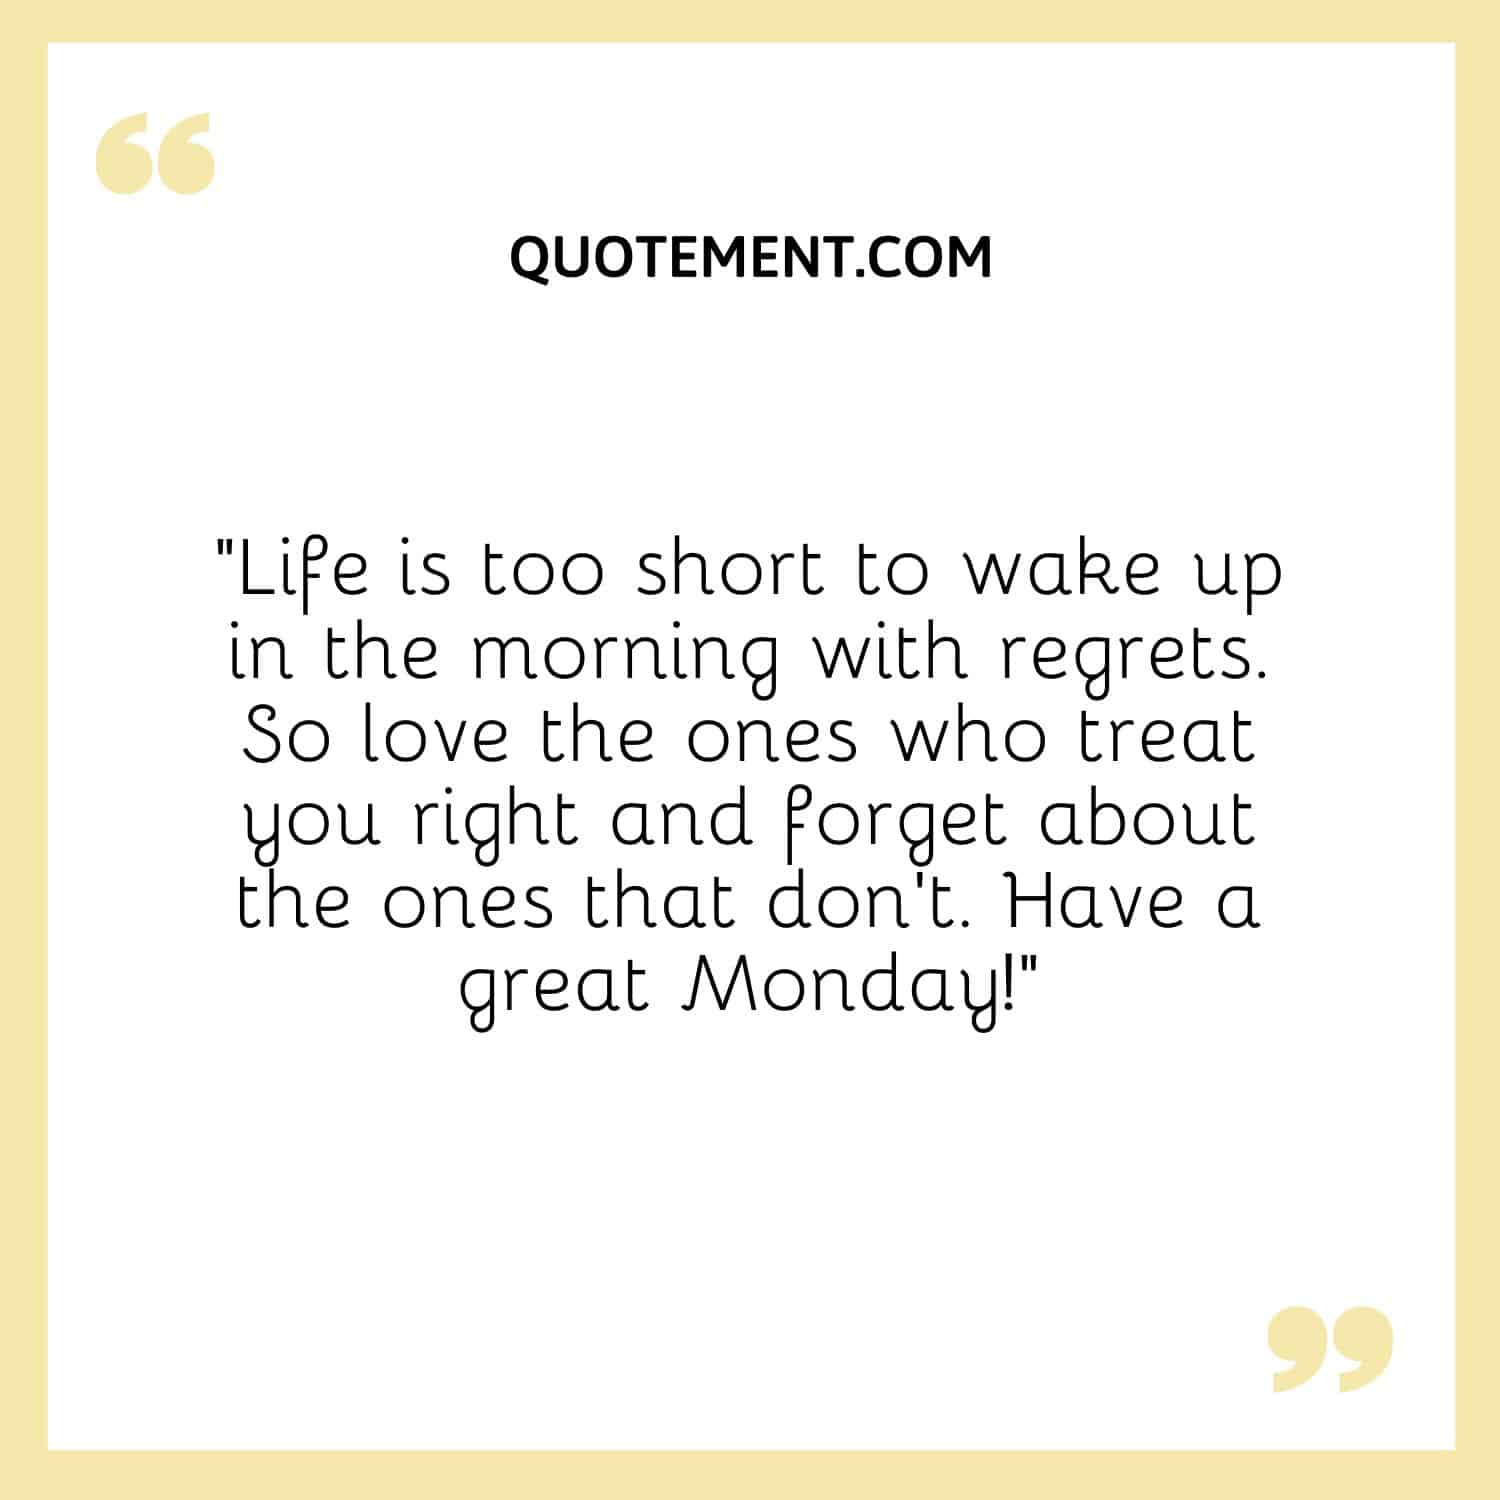 Life is too short to wake up in the morning with regrets